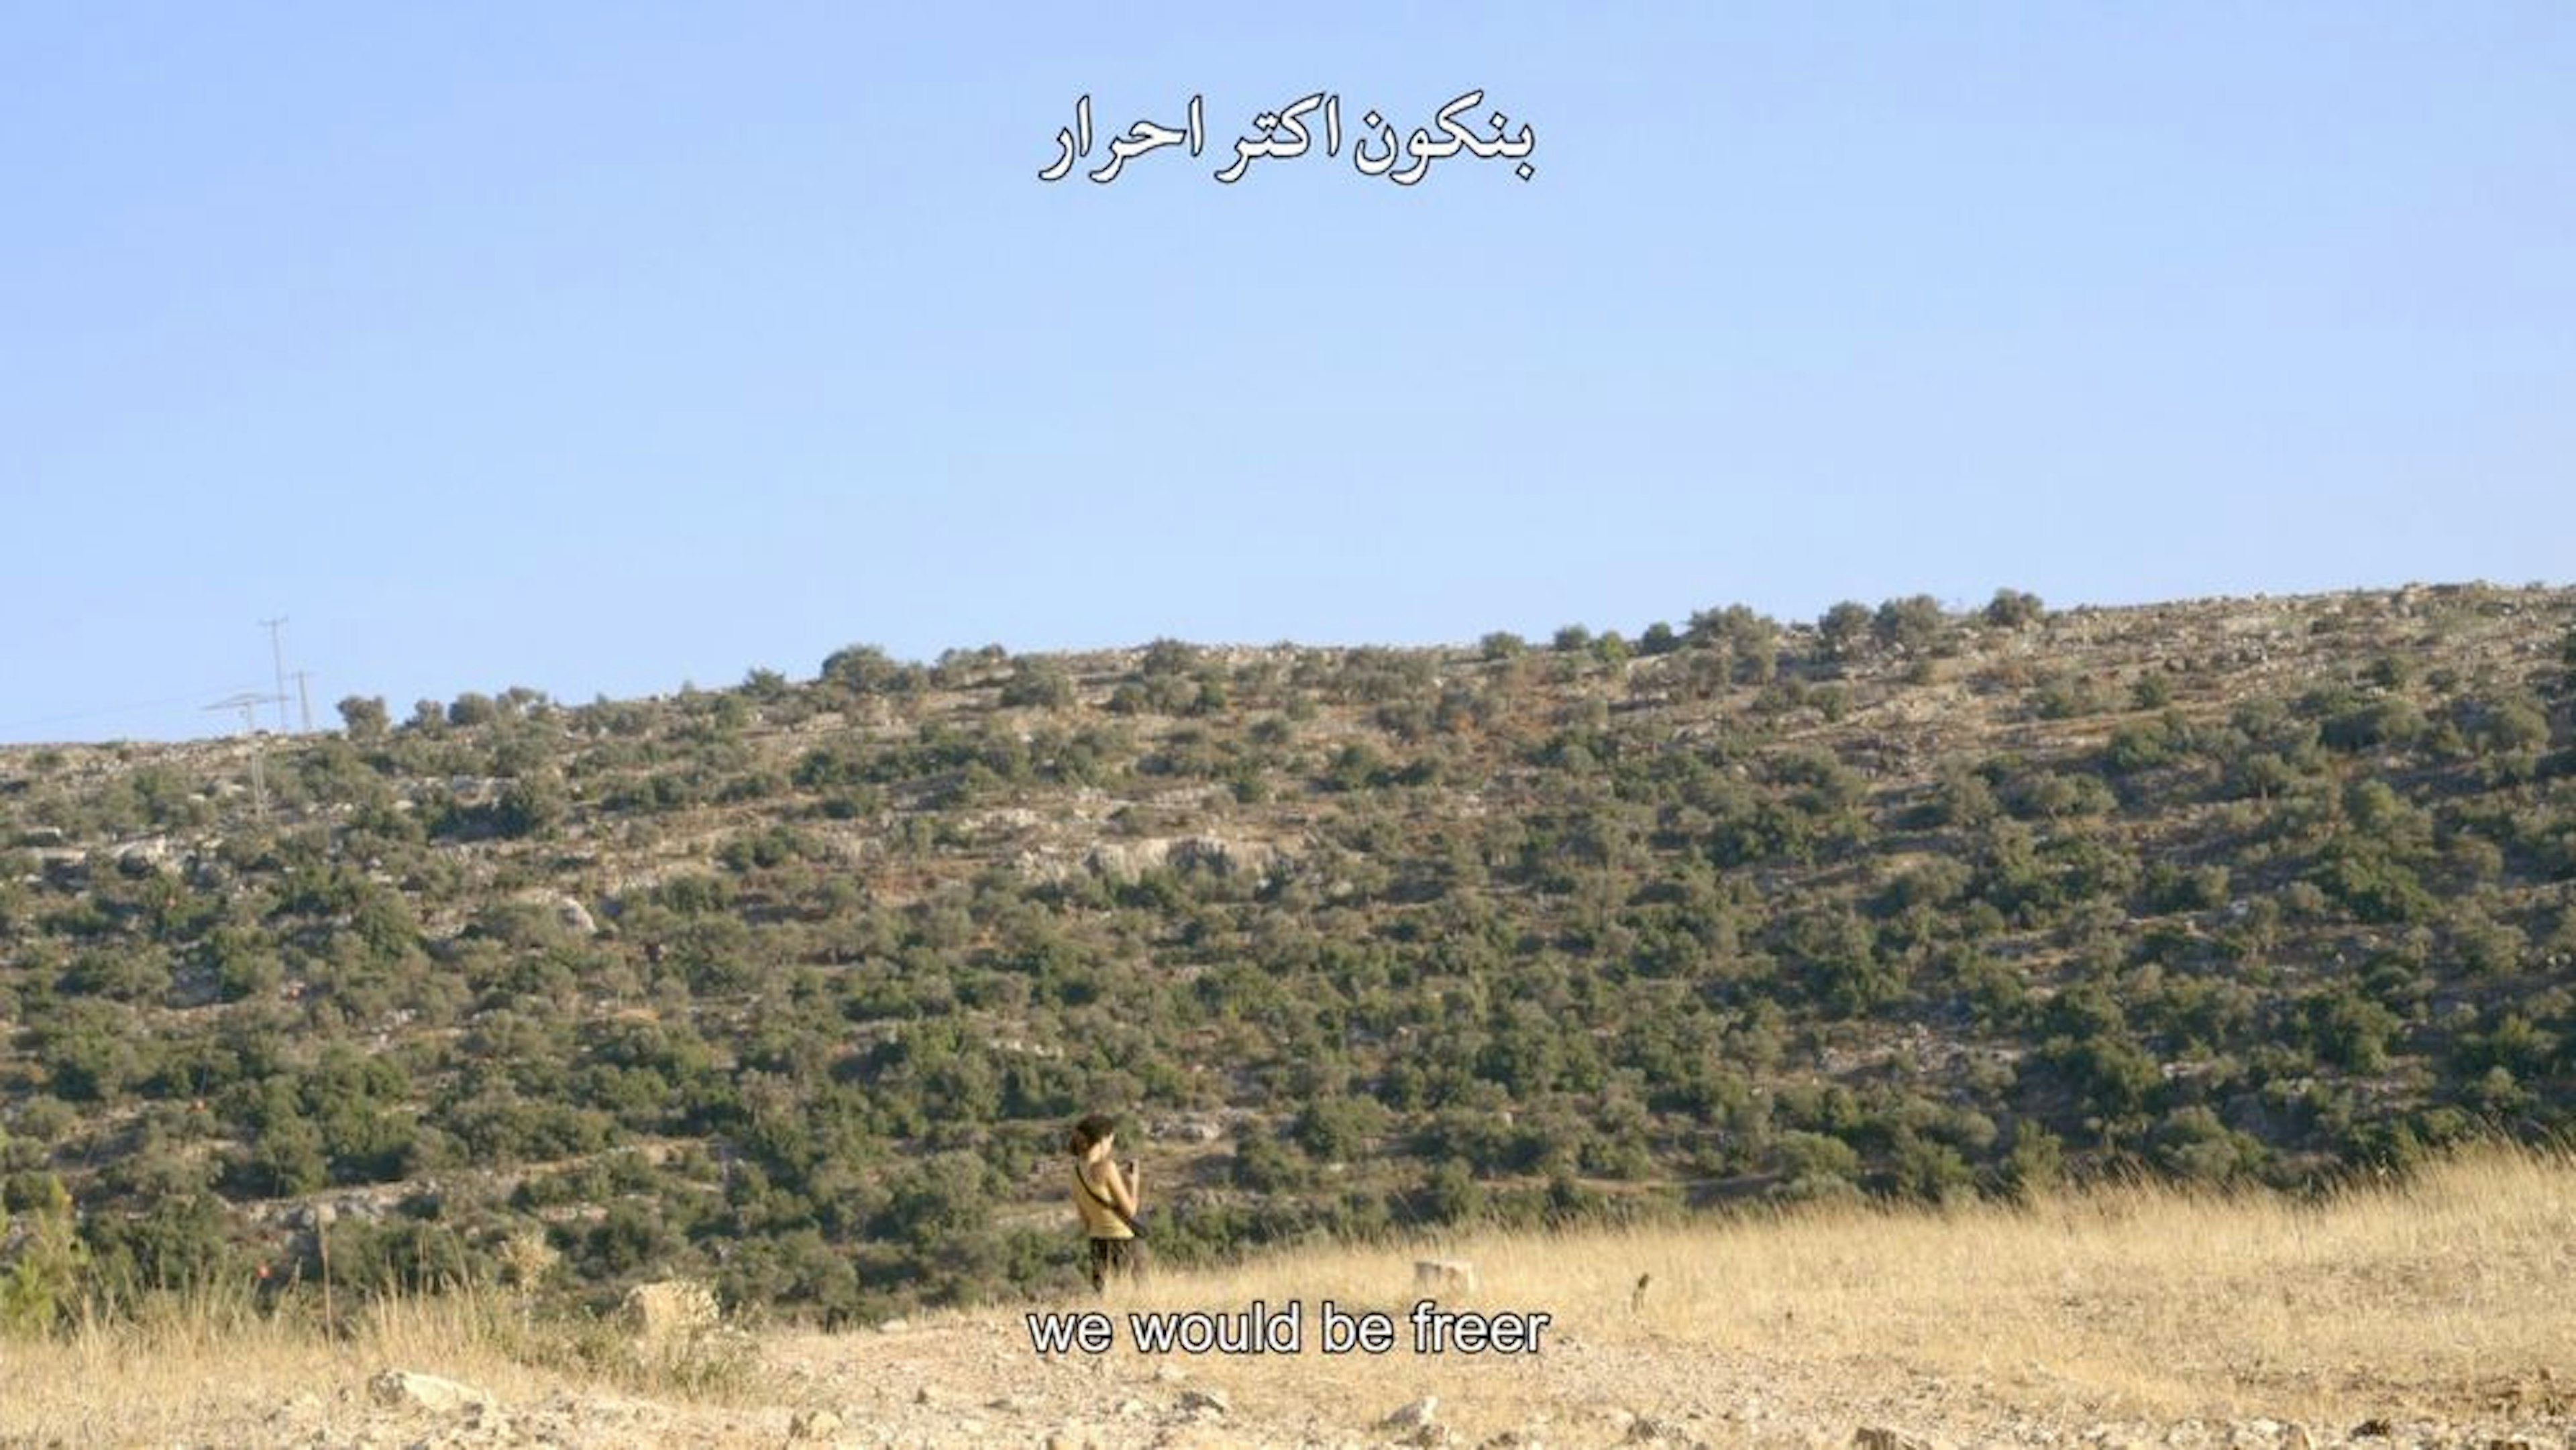 Blue sky and sunny day illuminating a landscape on the side of a hill. A small figure is seen in the distance. On the top is writing in Arabic letters. On bottom, subtitles read, “We would be freer.”